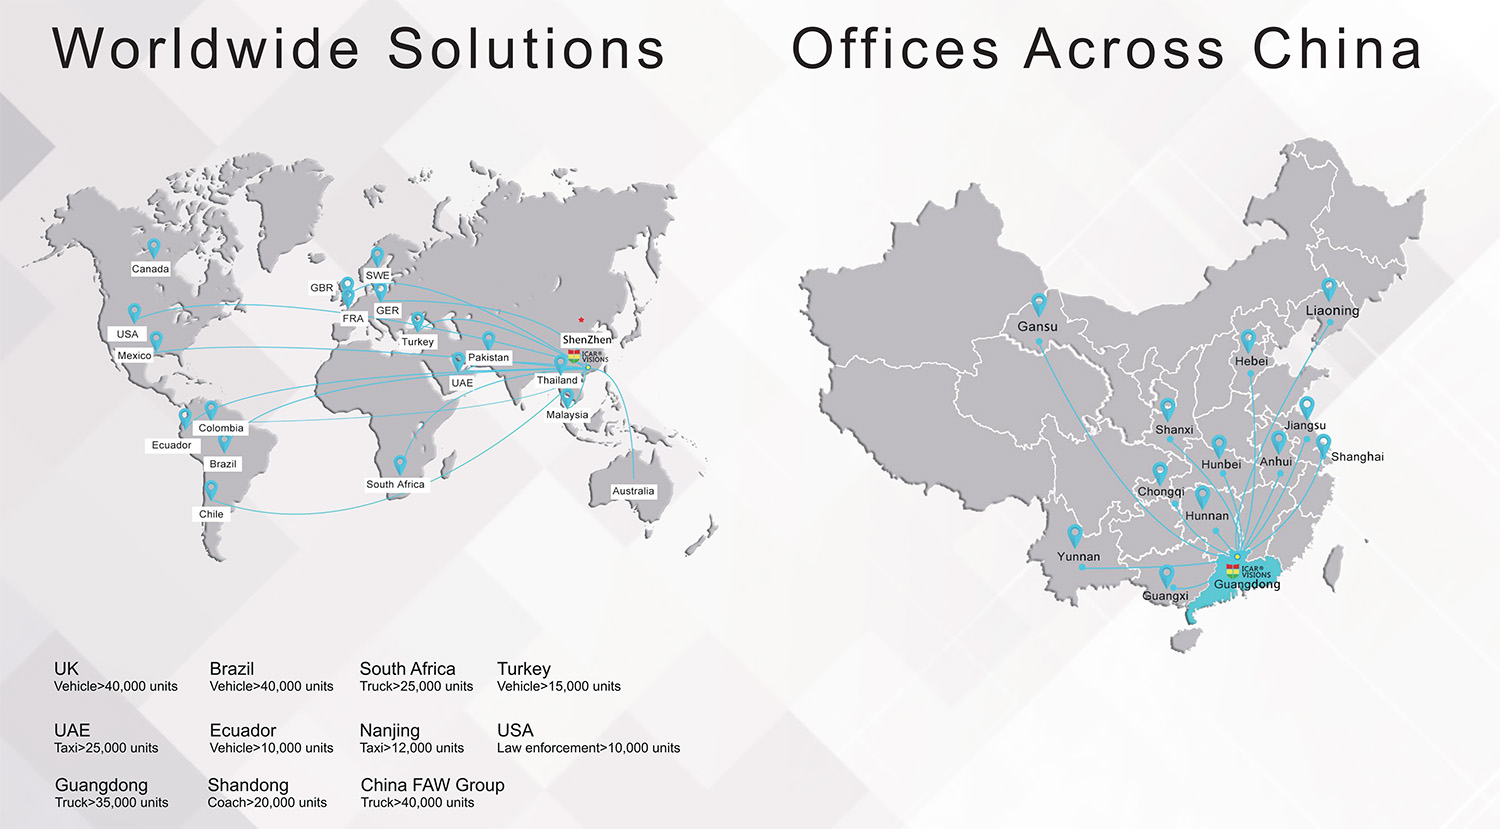 Worldwide Solutions and Offices Across China